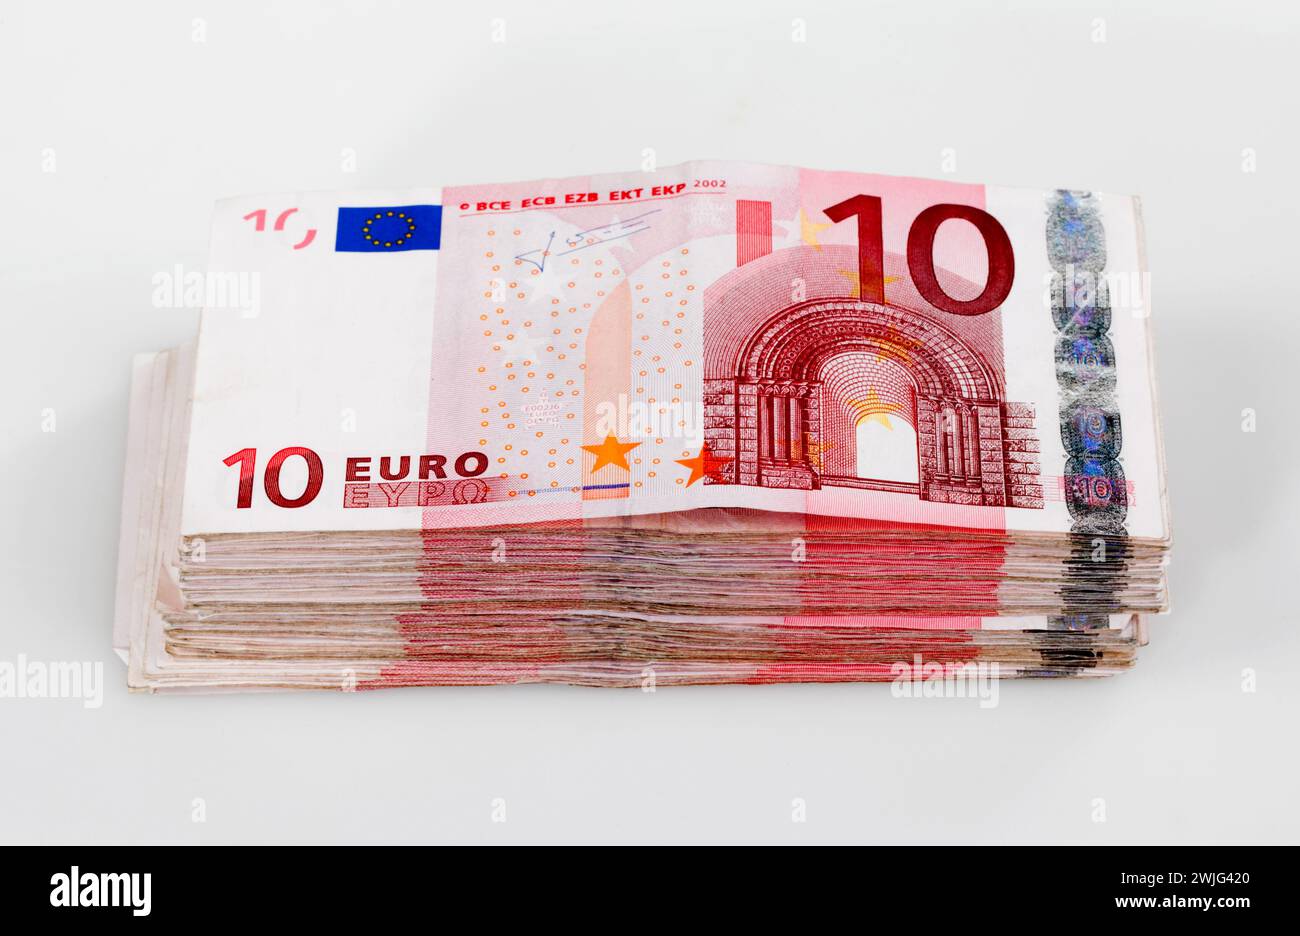 A stack 10 Euro banknotes, Germany, Europe Stock Photo